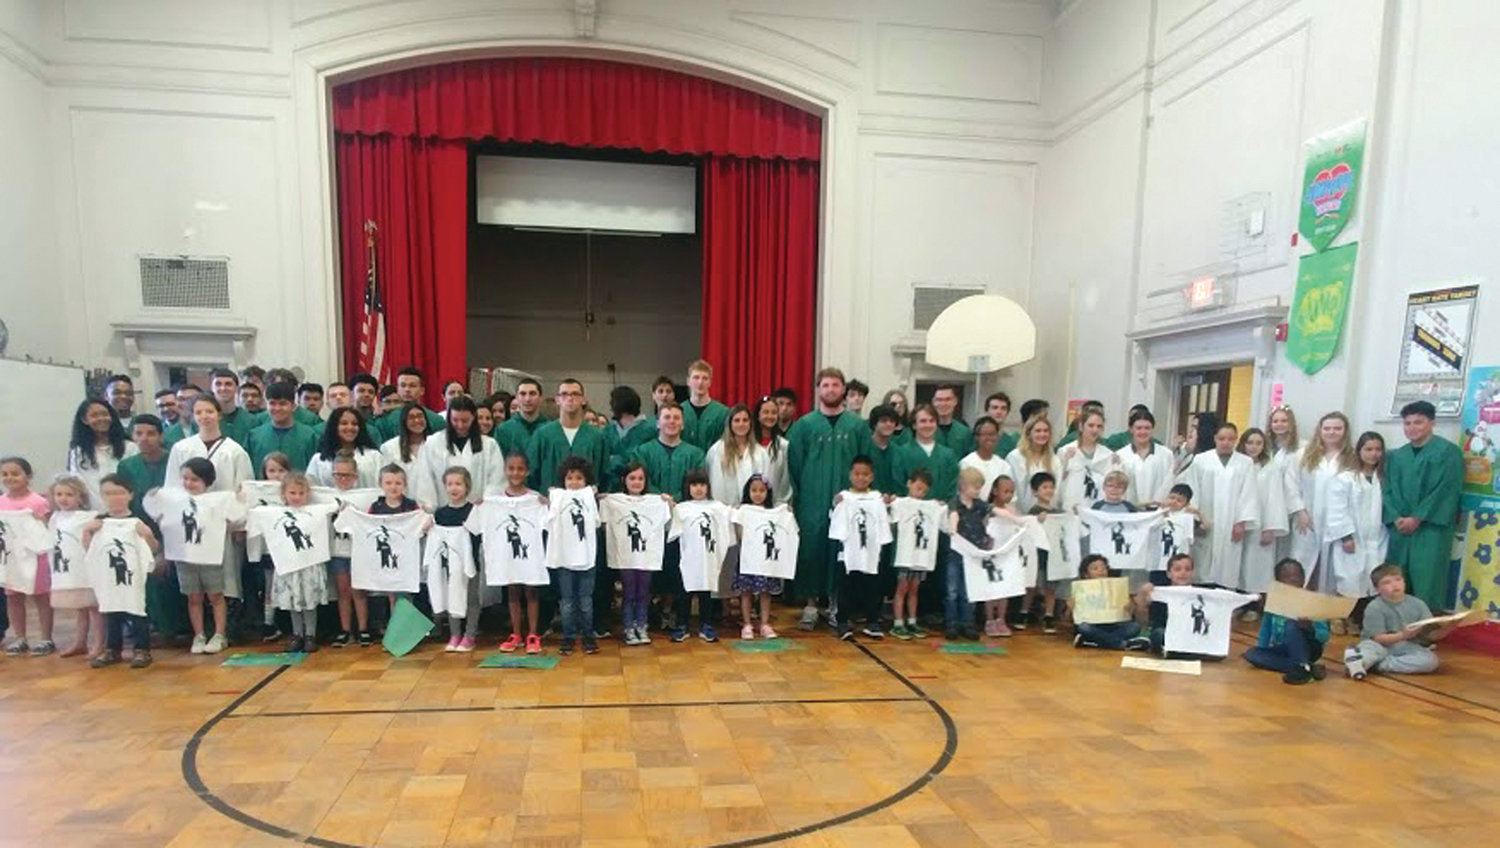 RETURN TO RHODES: The seniors handed out their T-shirt gifts to the kindergarten students and posed for a group photo. The kindergarten students will graduate in 2031.